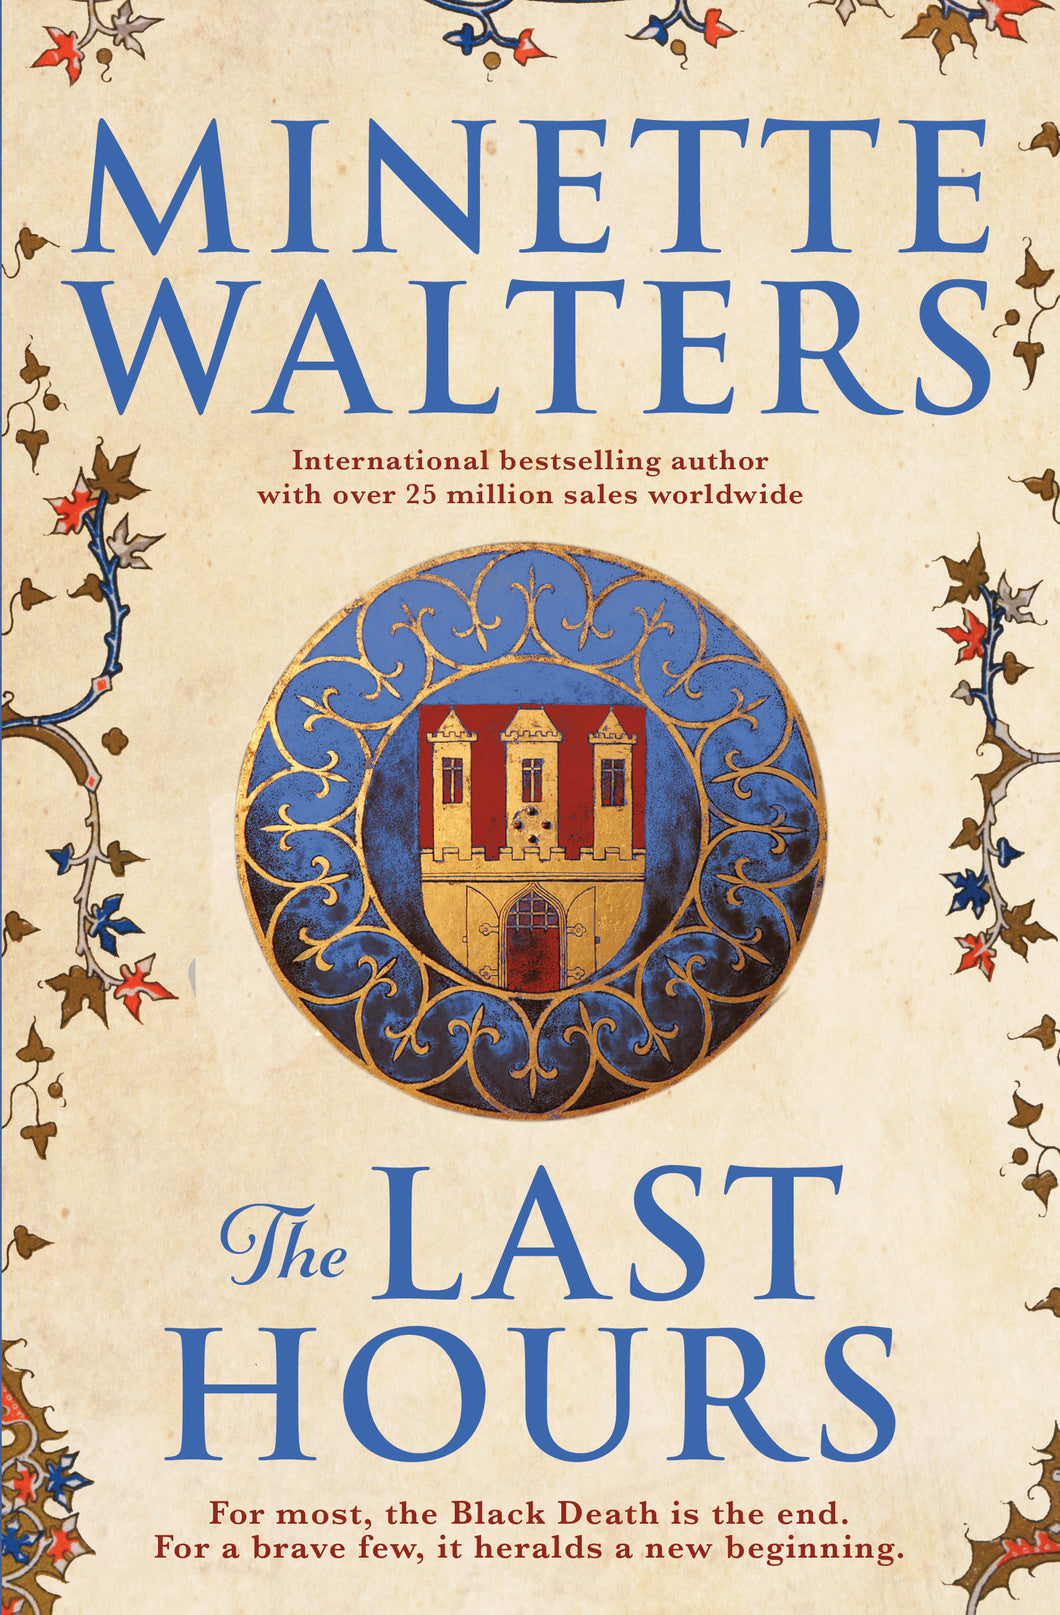 The Last Hours by Minette Walters: stock image of front cover.